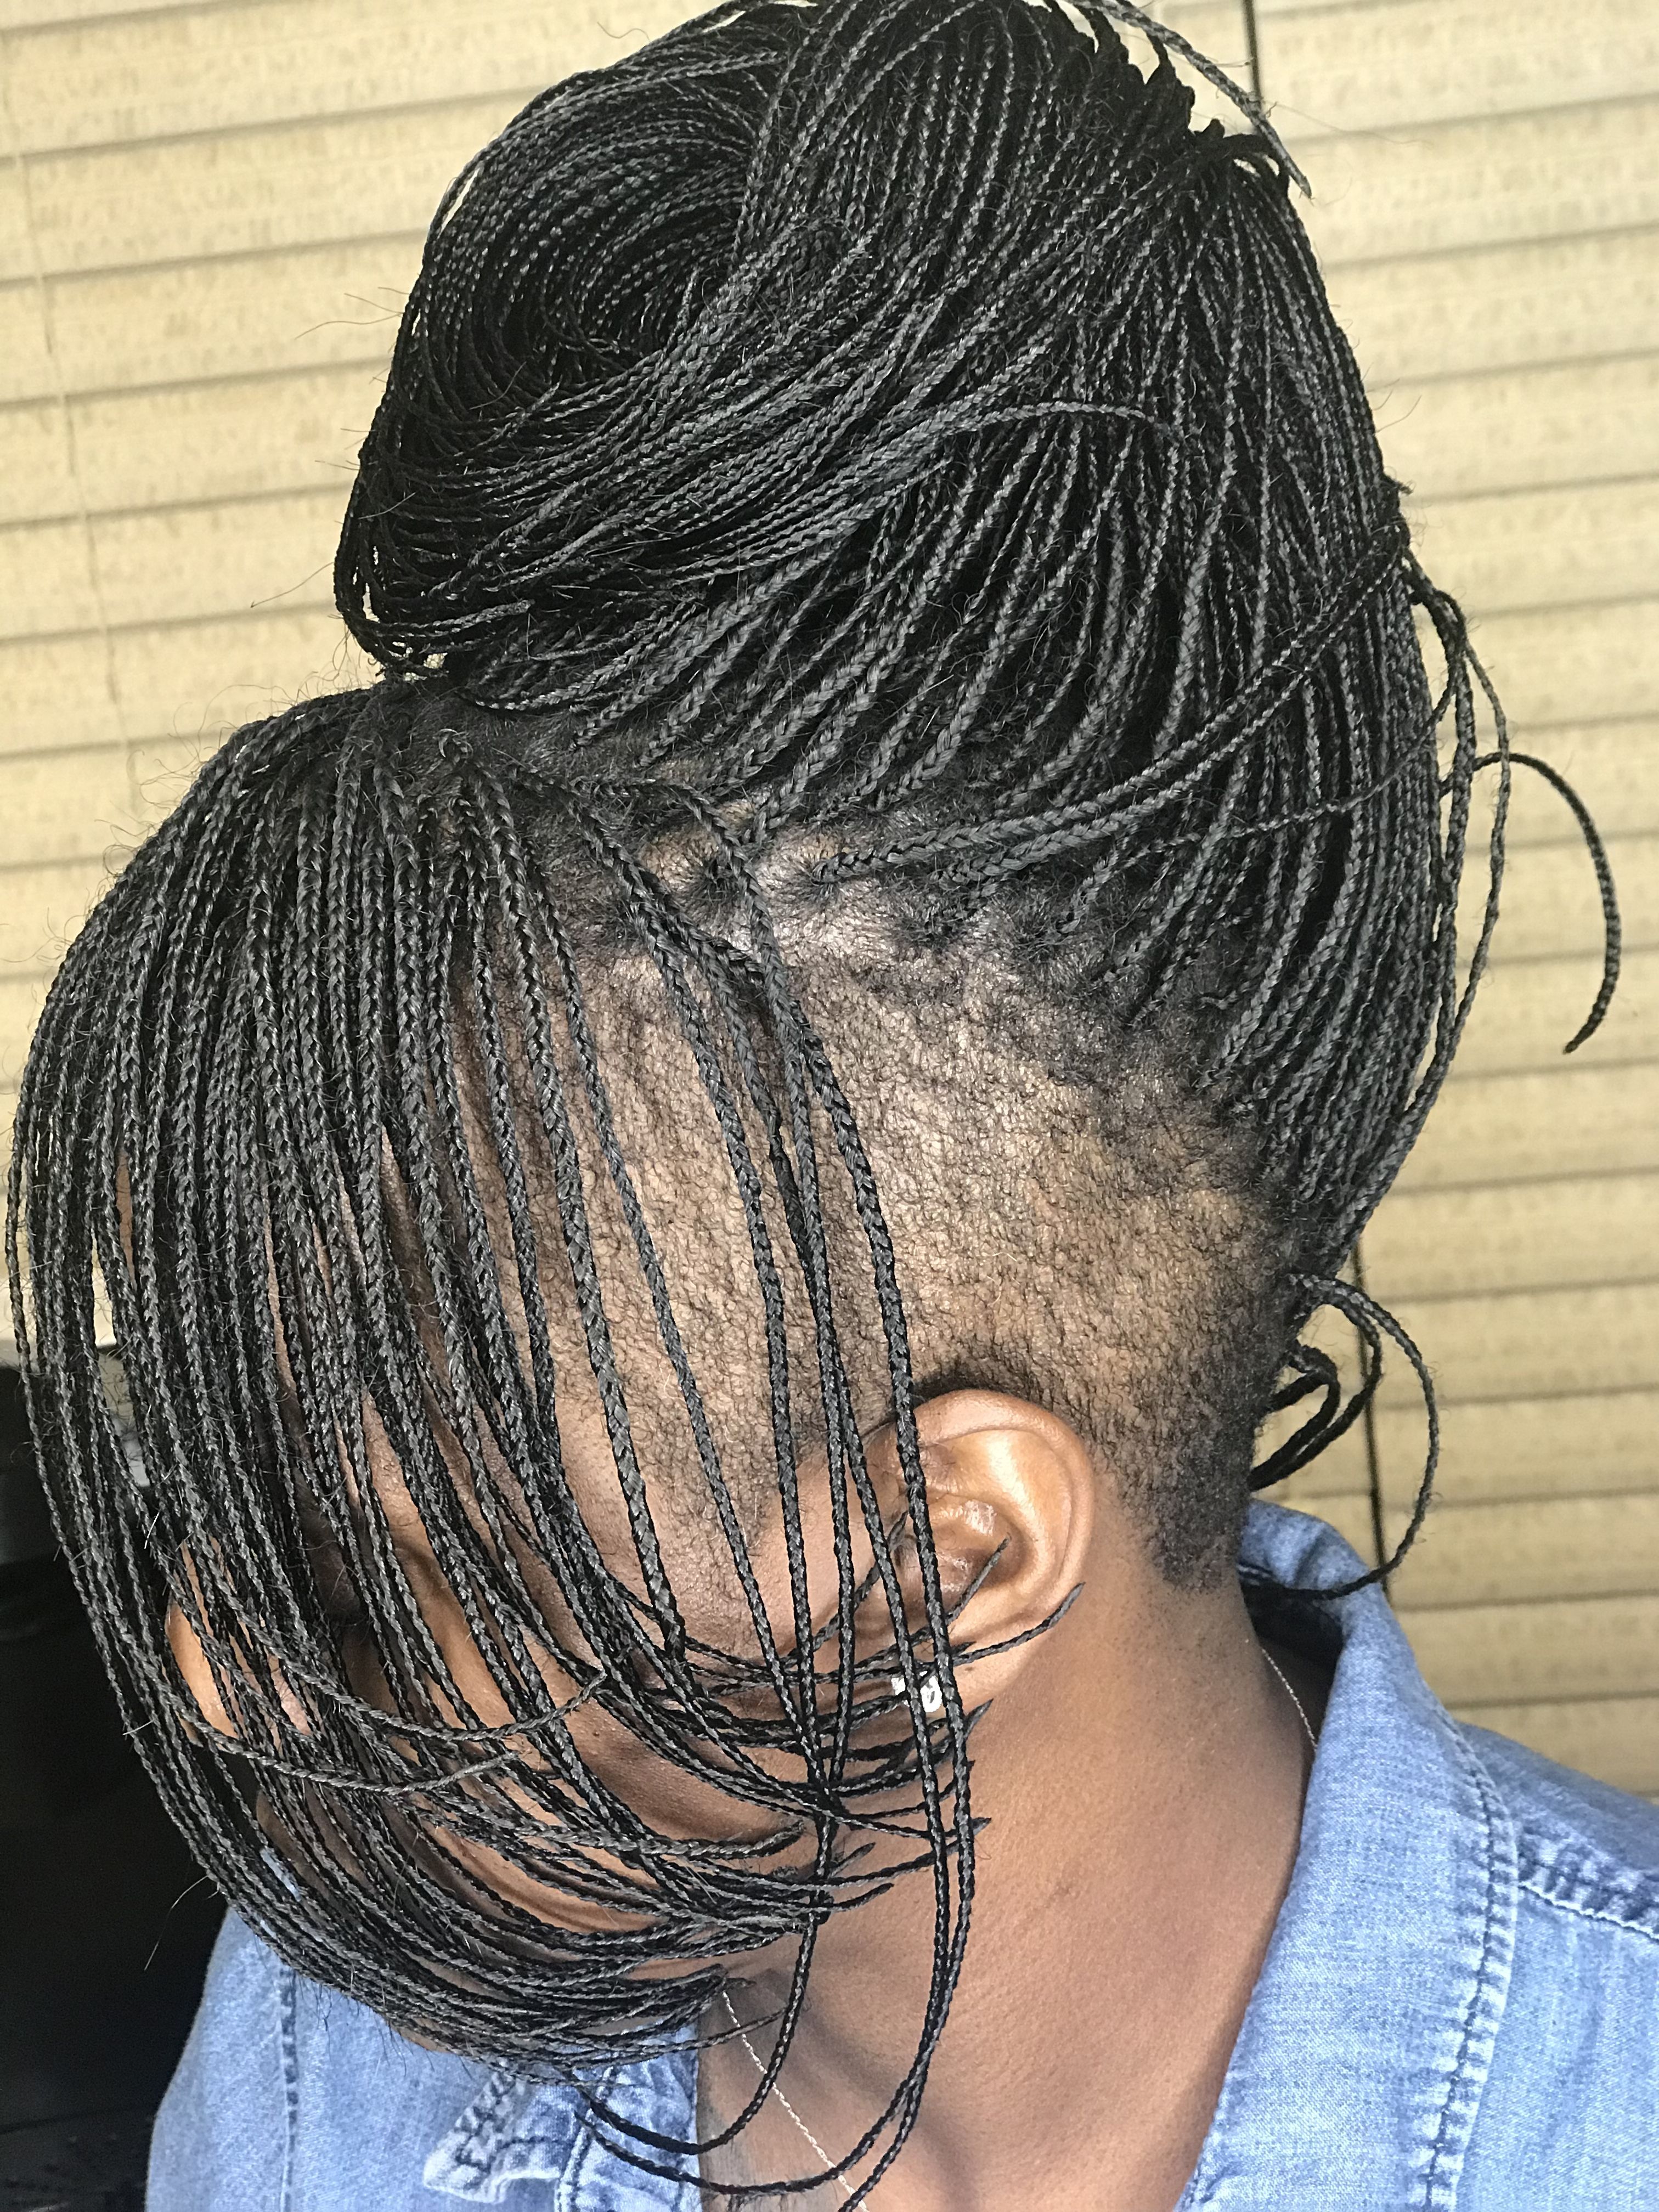 40 Ideas Of Micro Braids And Invisible Braids Hairstyles With Regard To Most Up To Date Undershave Micro Braid Hairstyles (View 5 of 20)